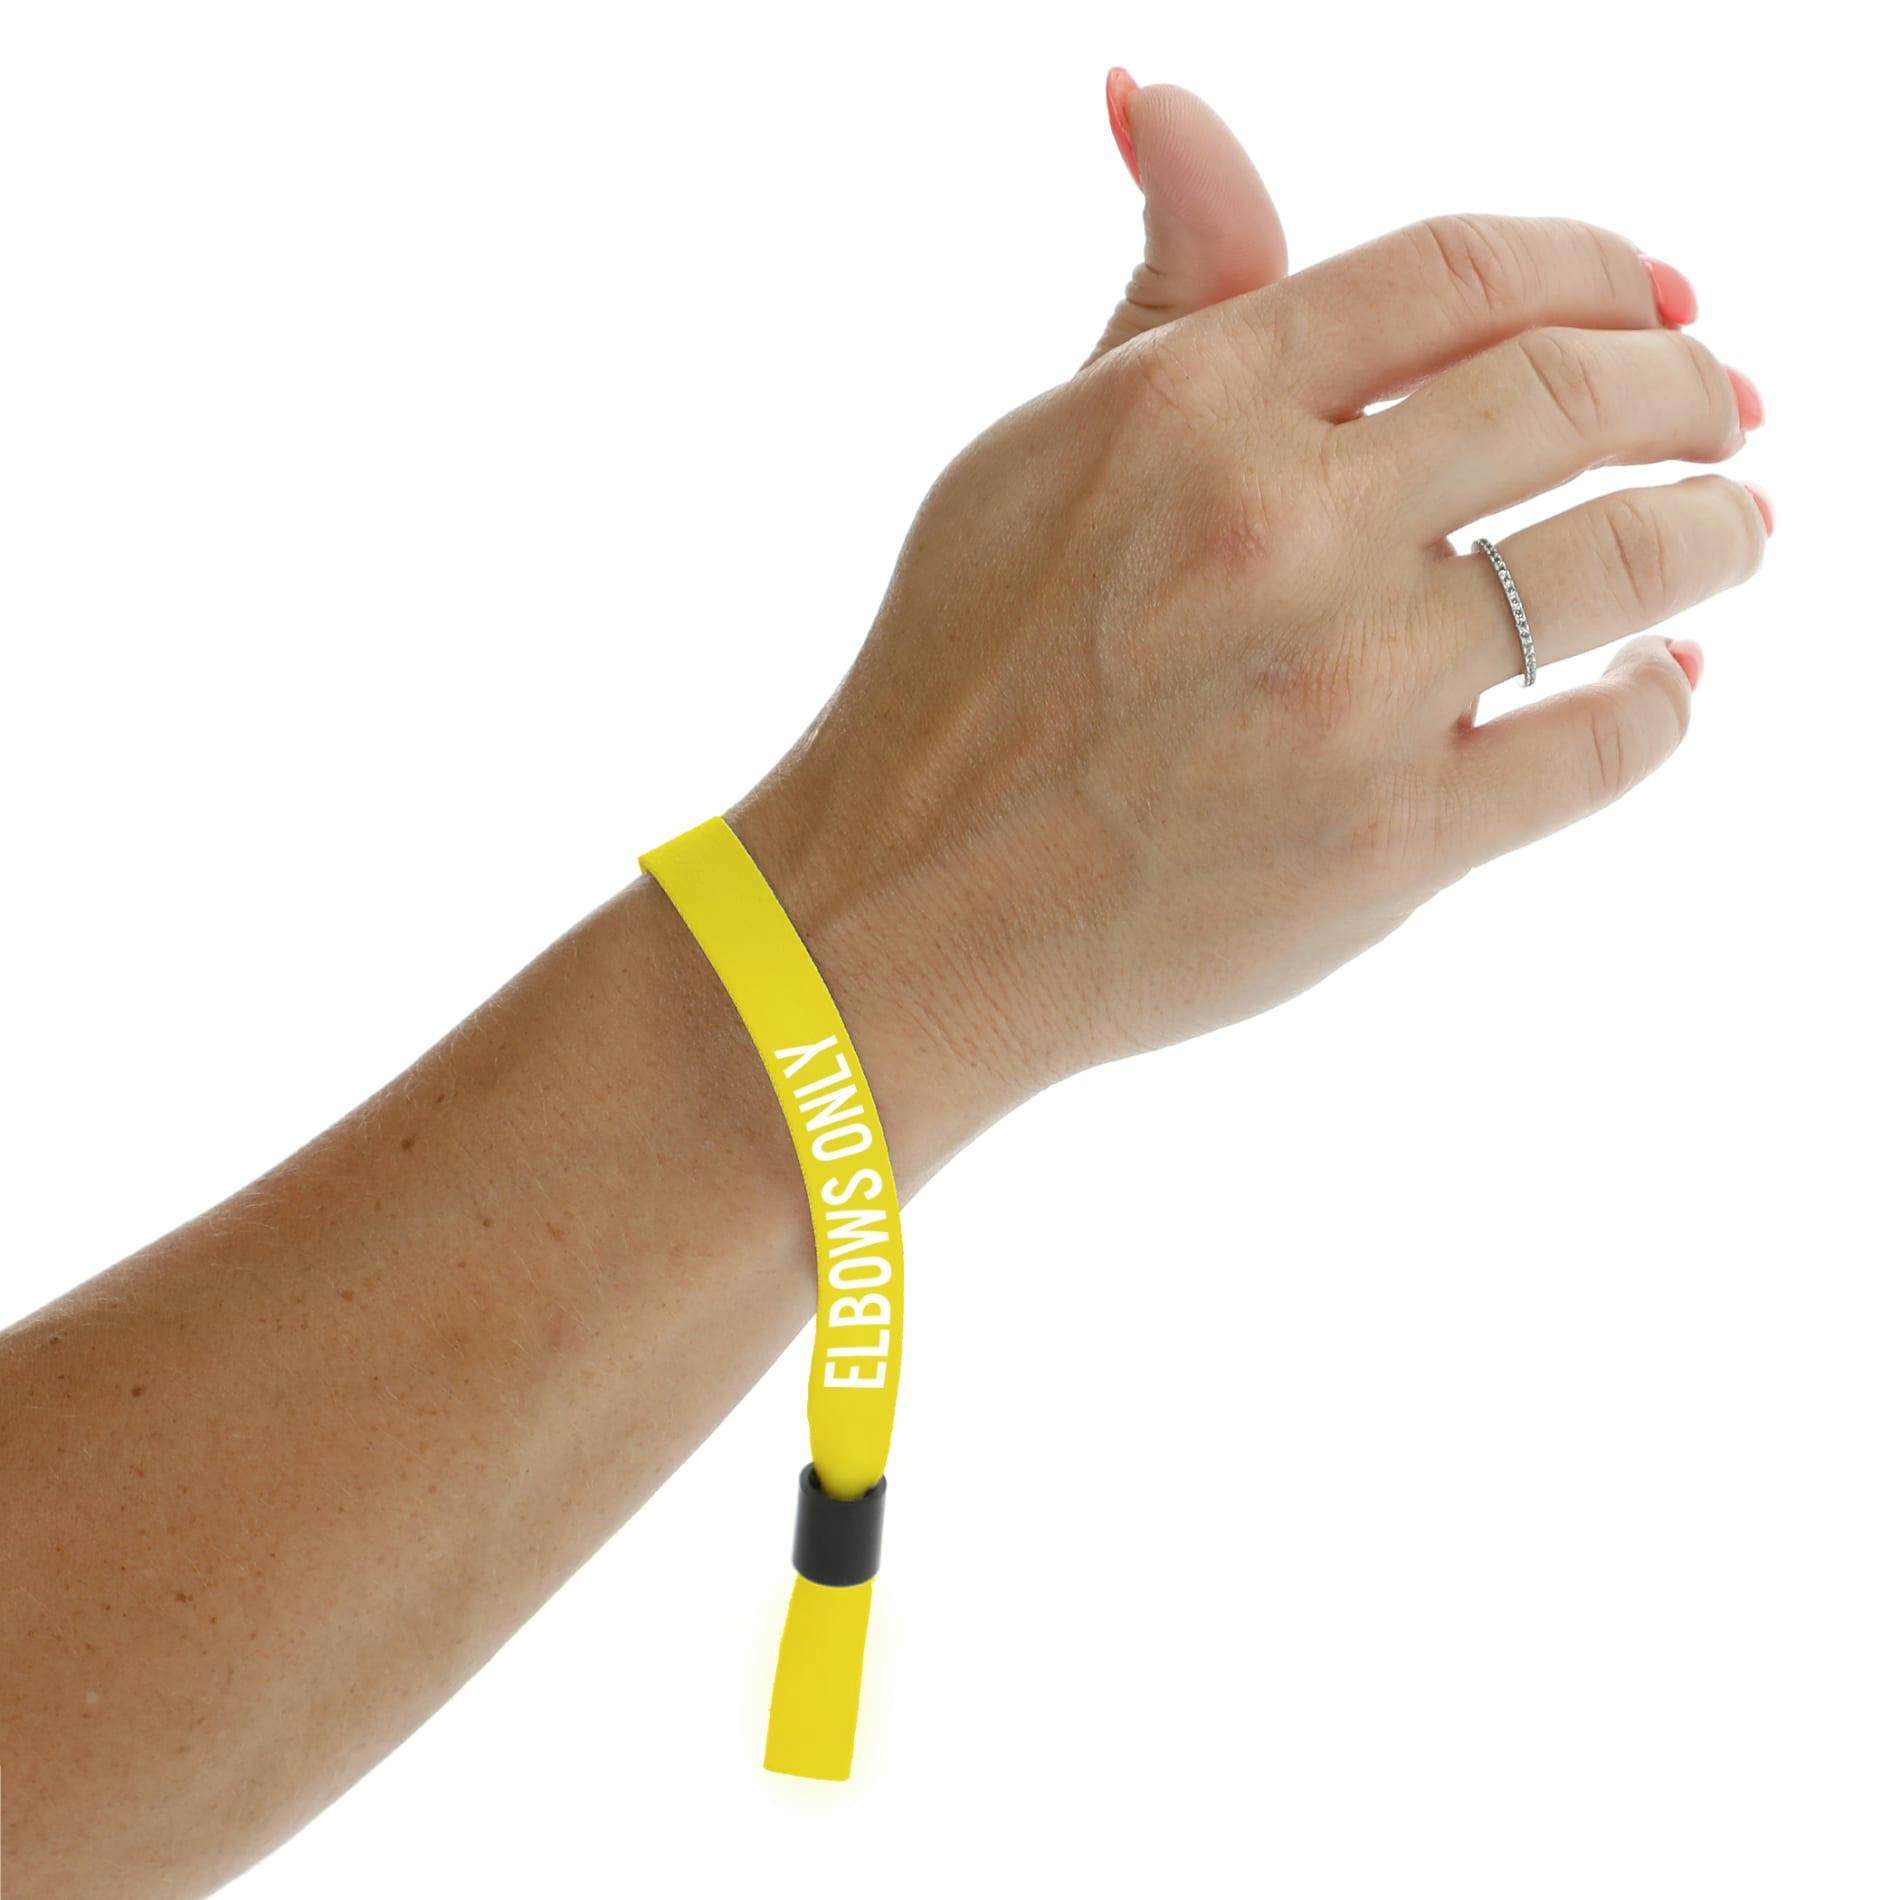 Full Color 1/2" Social Distancing Wristband - additional Image 5